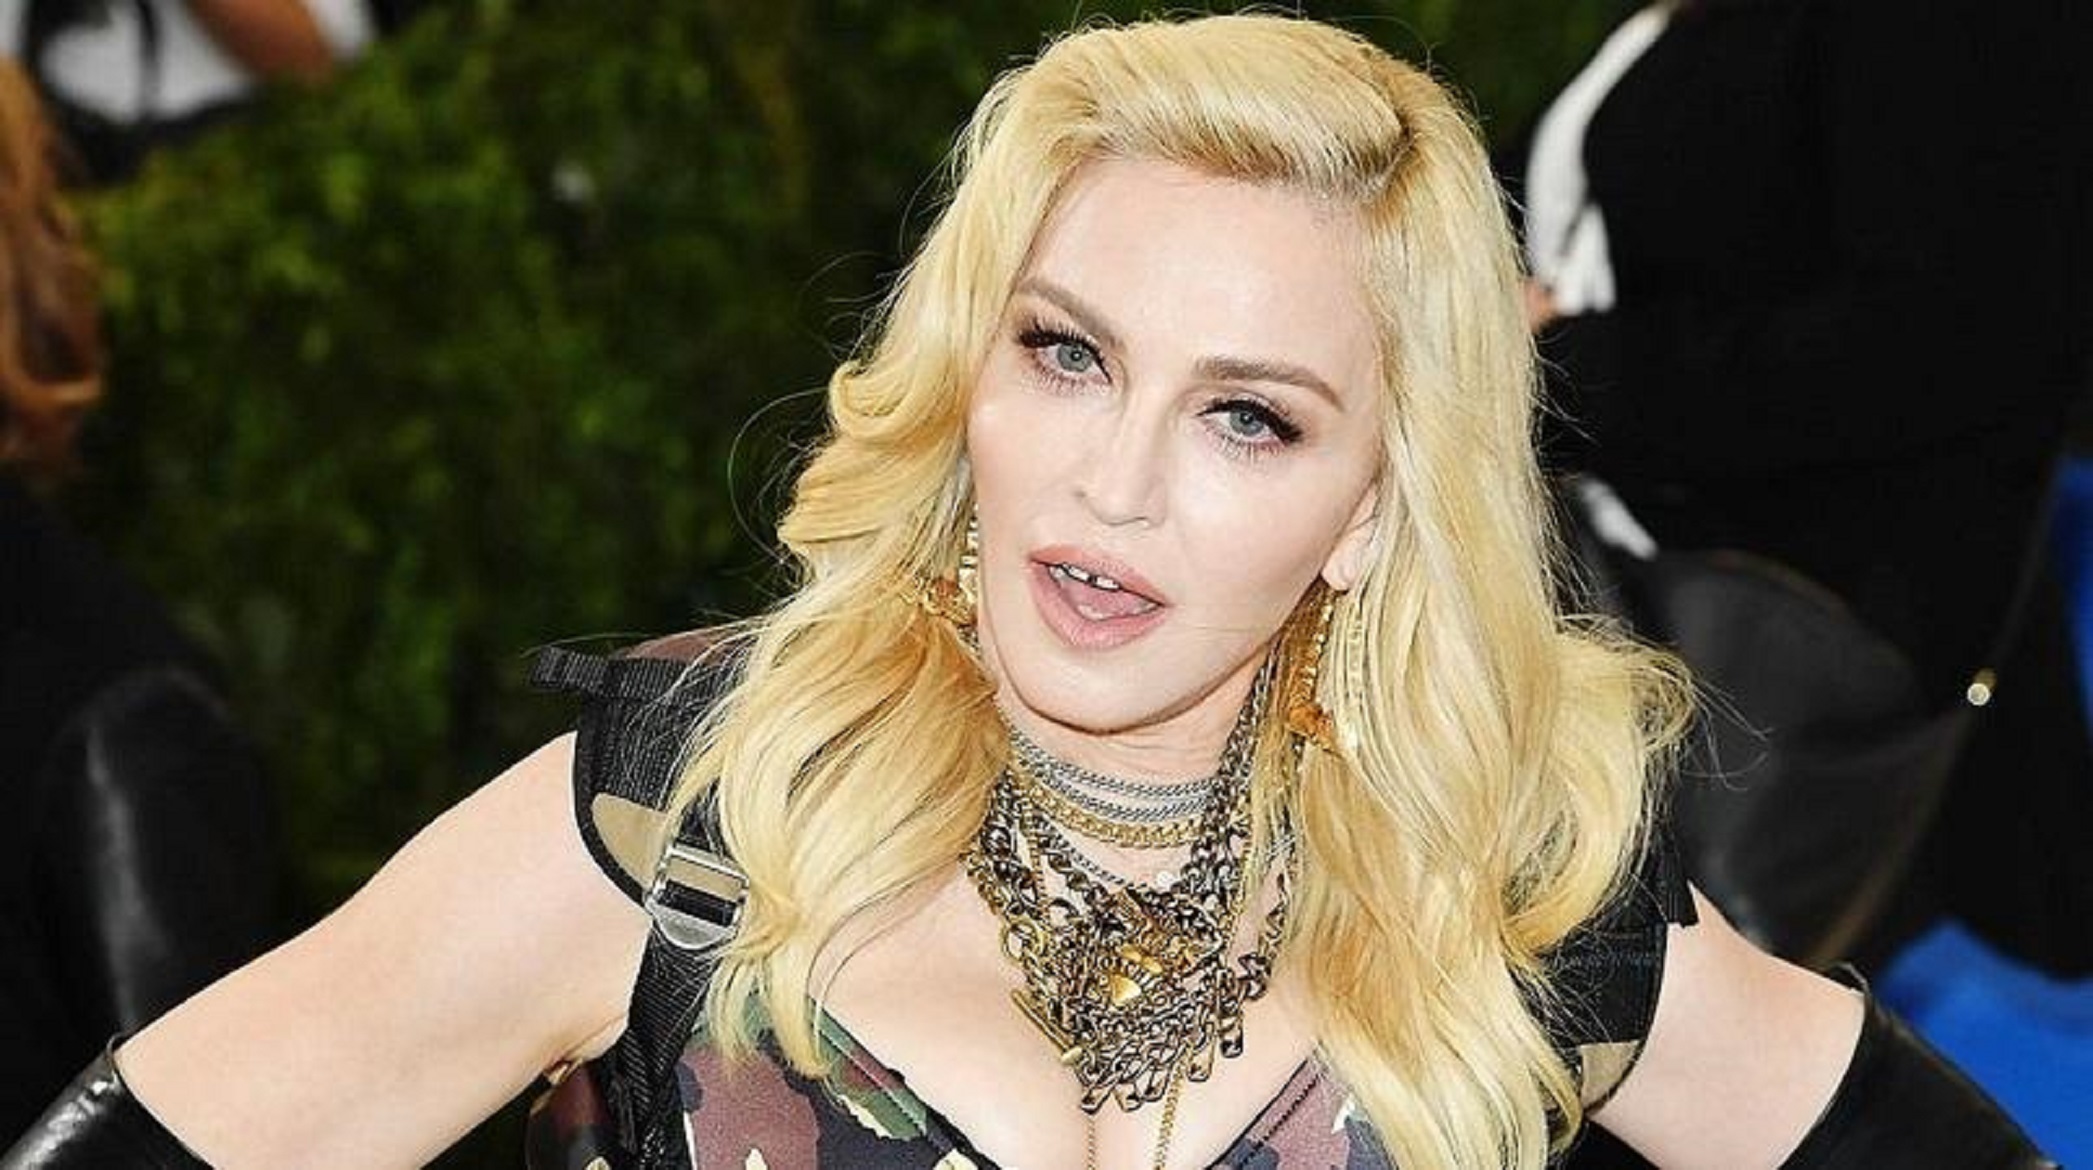 Madonna Lashes Out at Fan Who Criticized Her Post On Daunte Wright’s Shooting – ‘You Don’t Know Me B**ch”